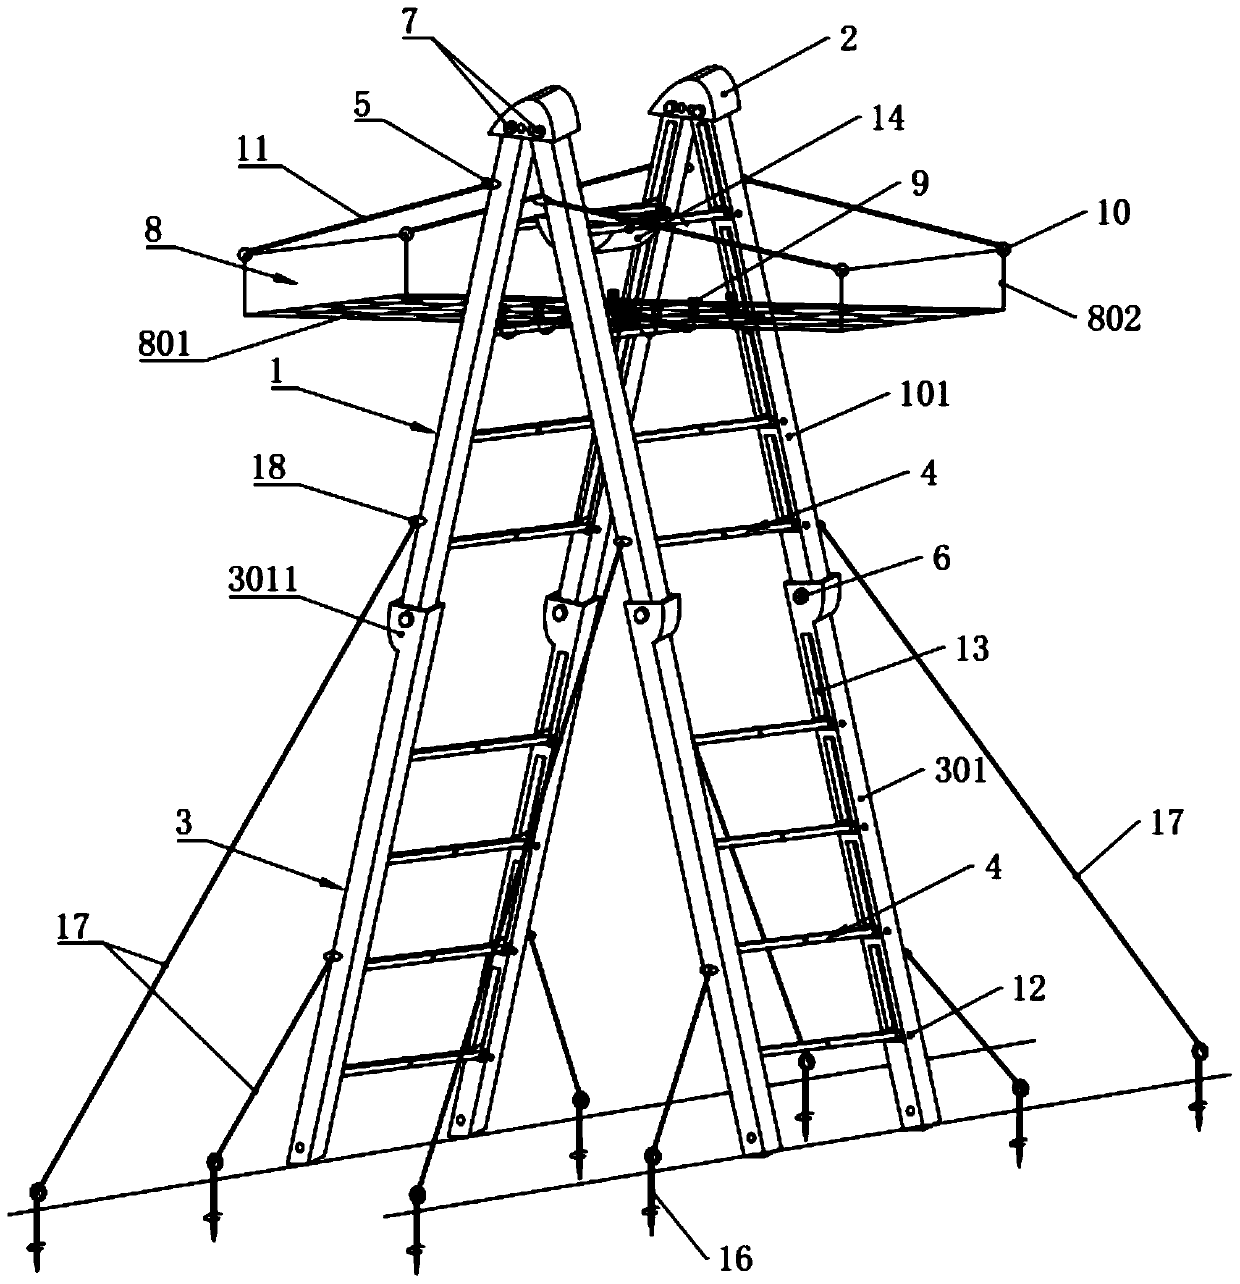 A portable insulating ladder platform that can be assembled